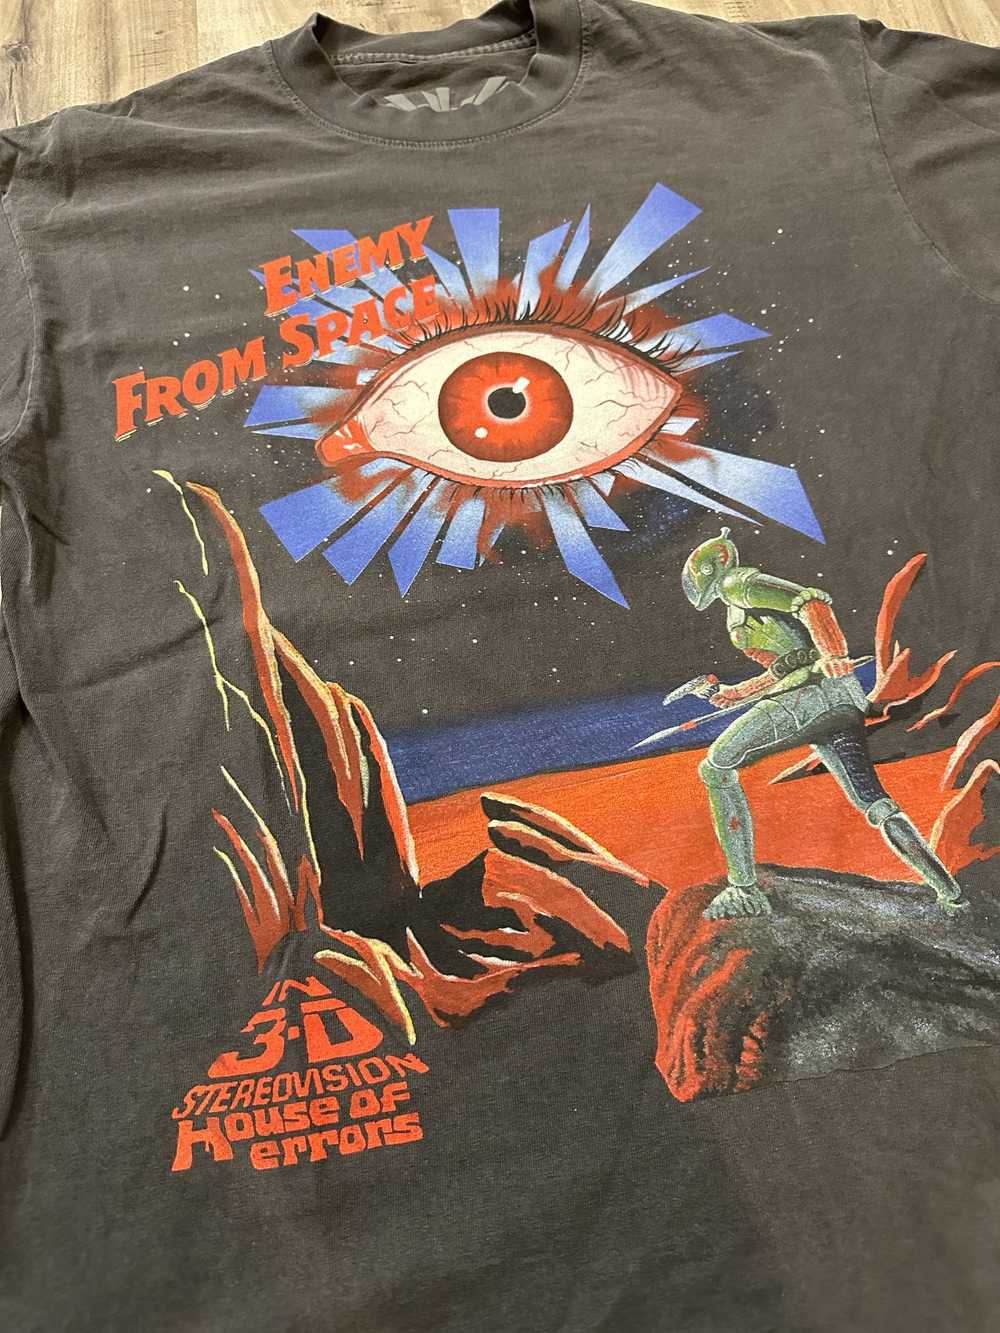 House of Errors Enemy from Space Tee - image 4